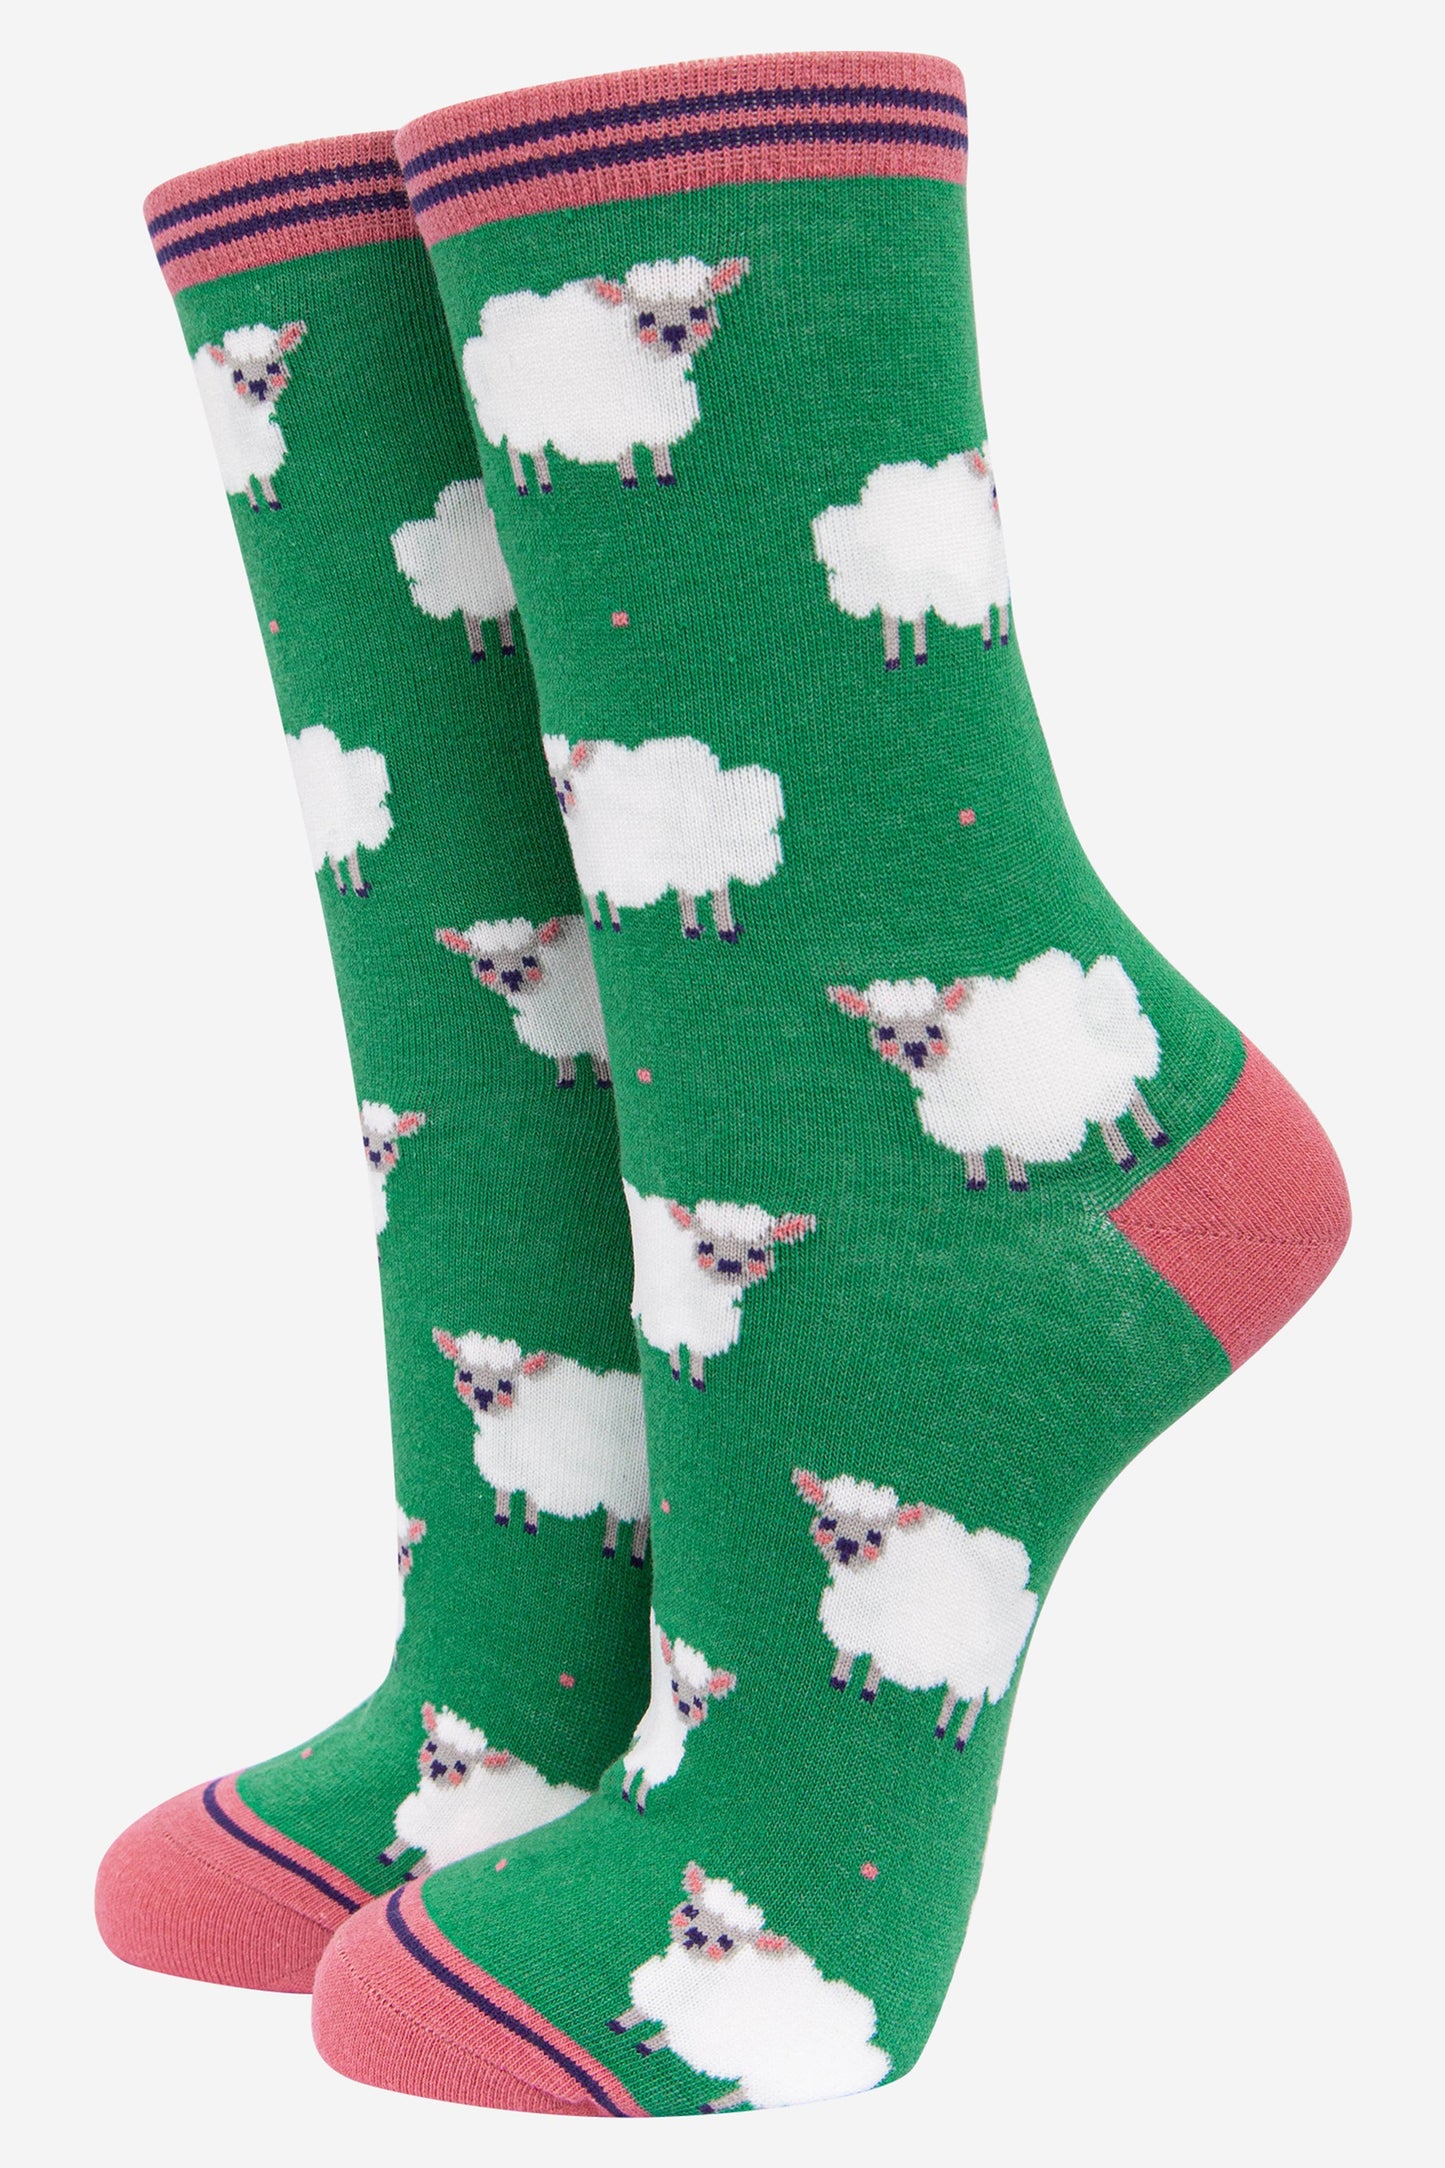 green ankle socks featuring a pattern of white woolly sheep all over